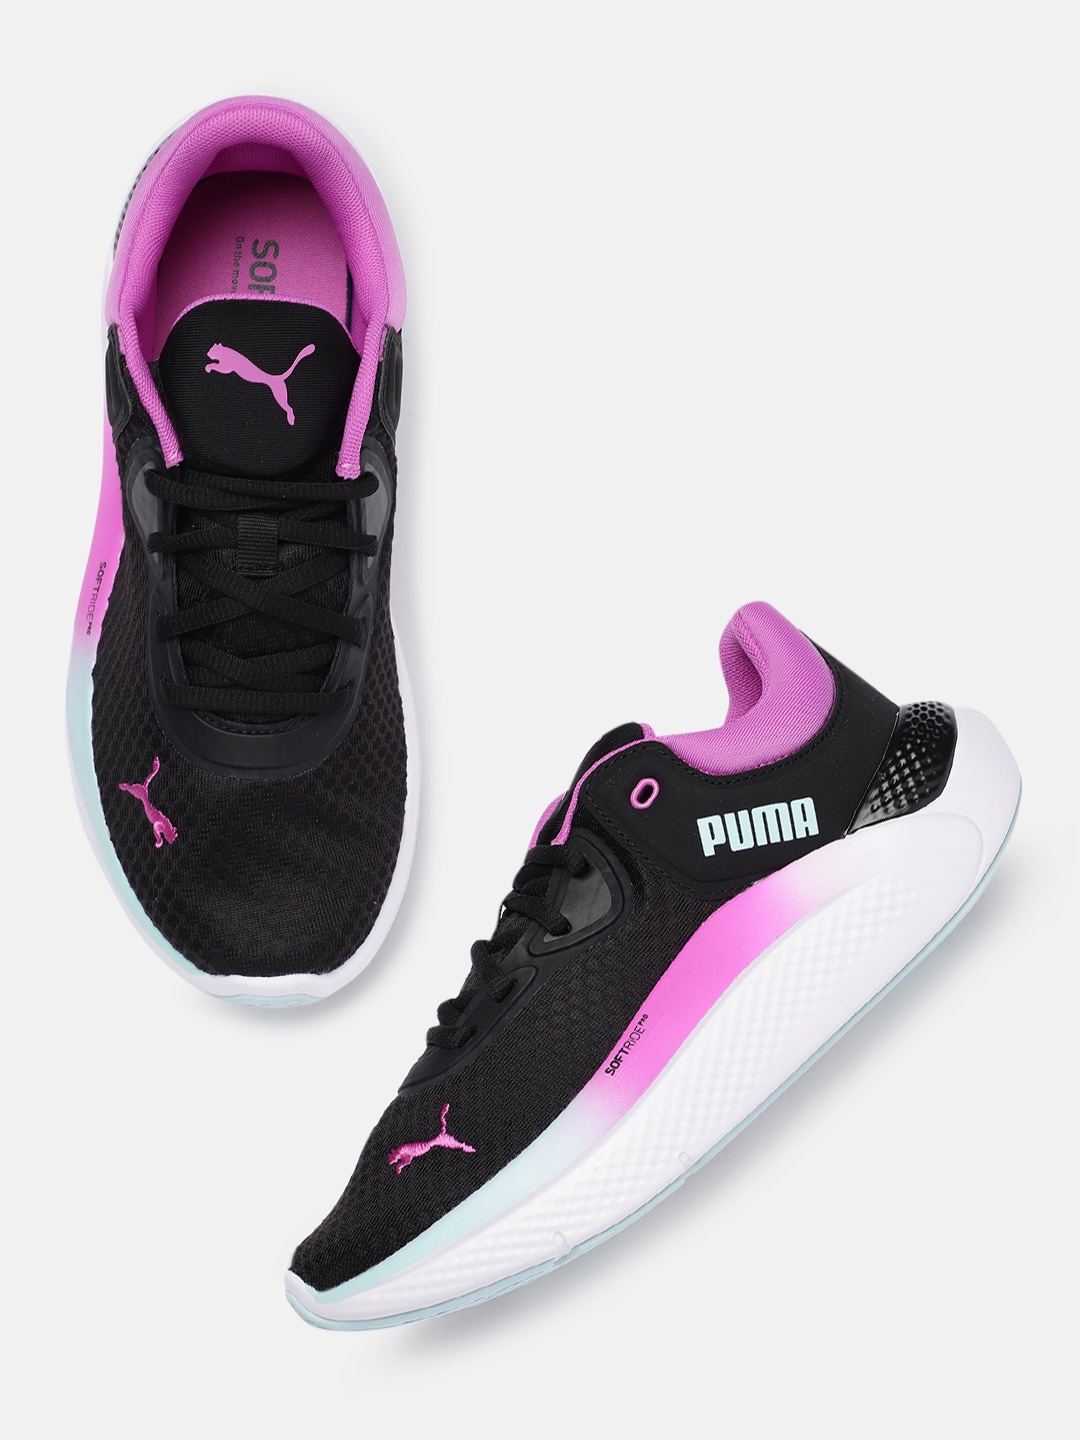 Puma Women Softride Pro Training Shoes Price in India